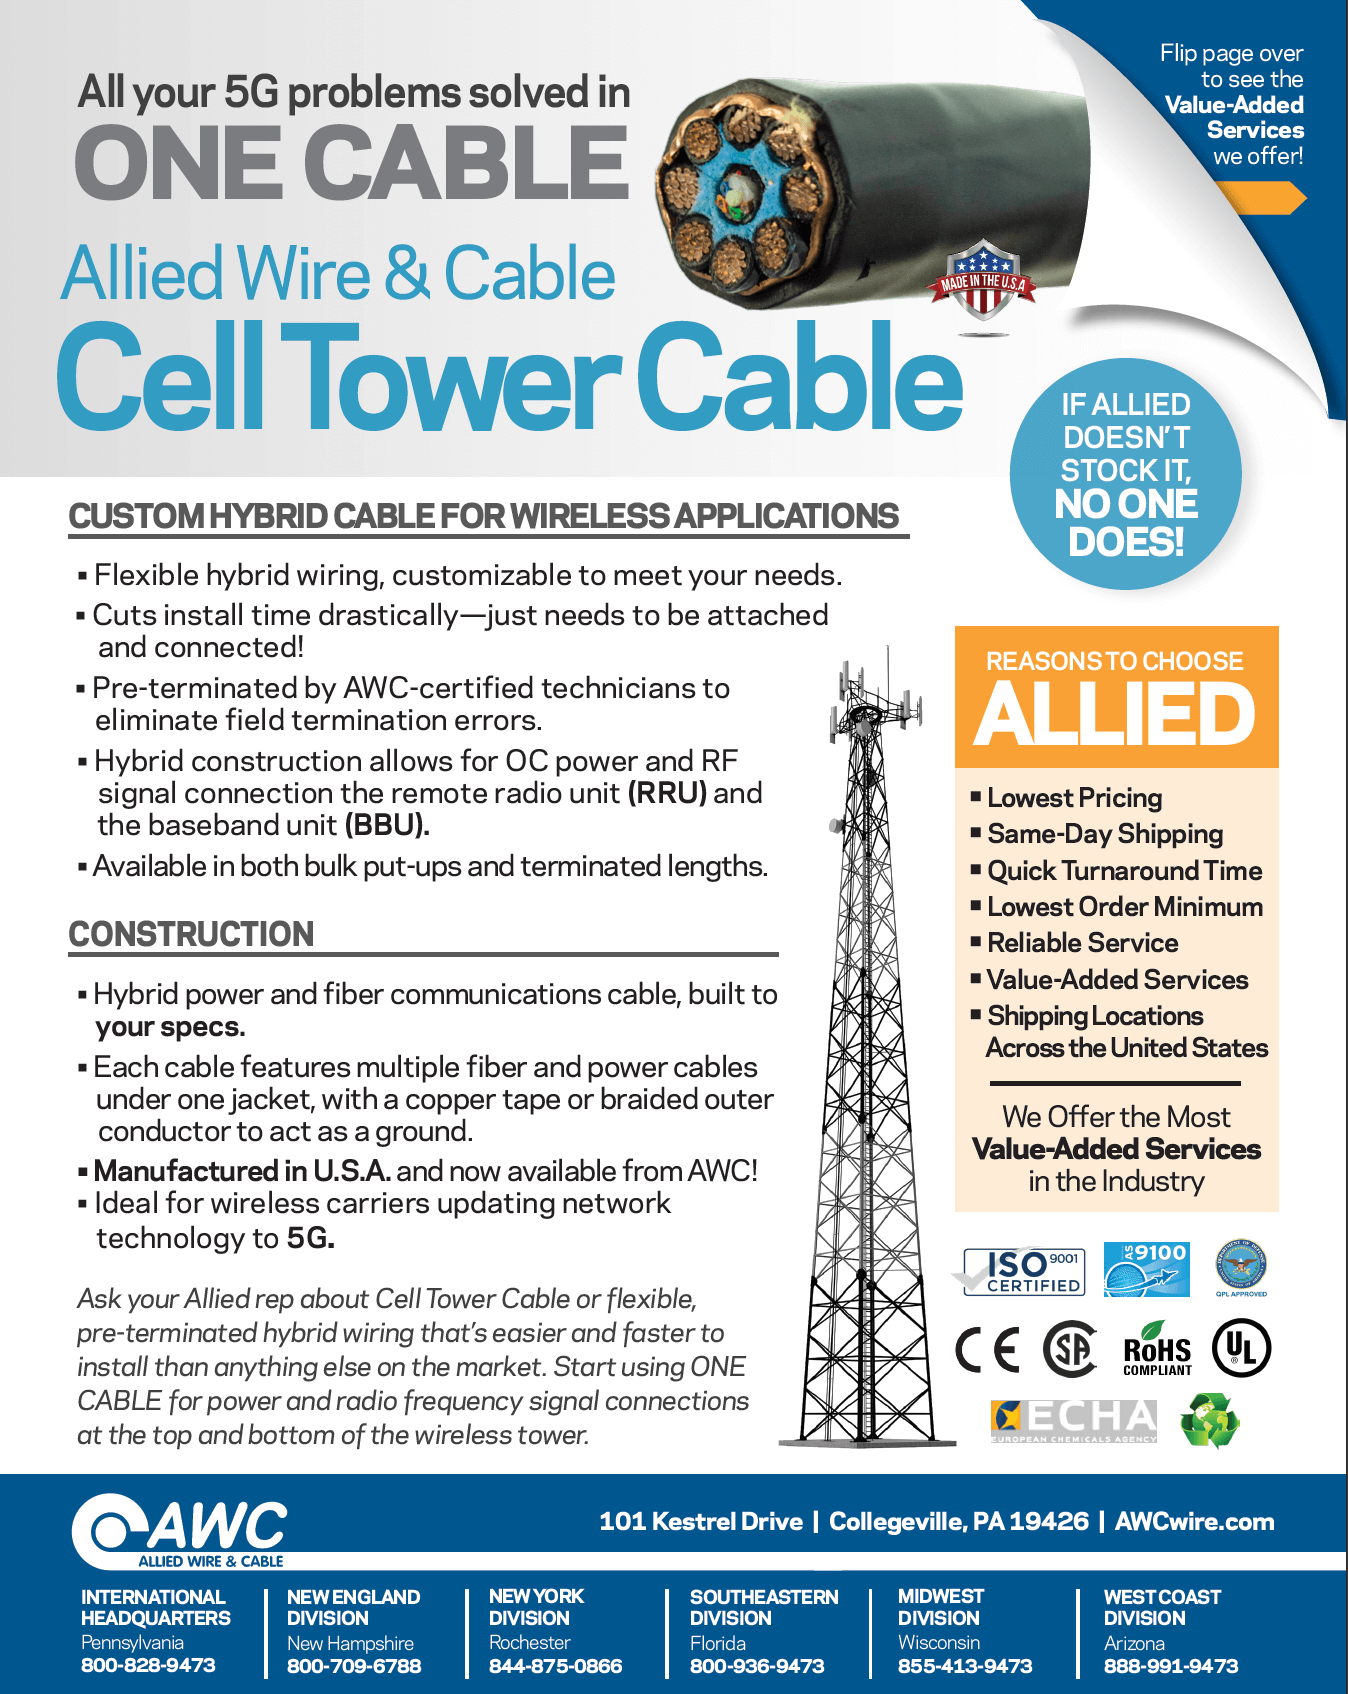 Cell Tower Cable Line Card from Allied Wire & Cable